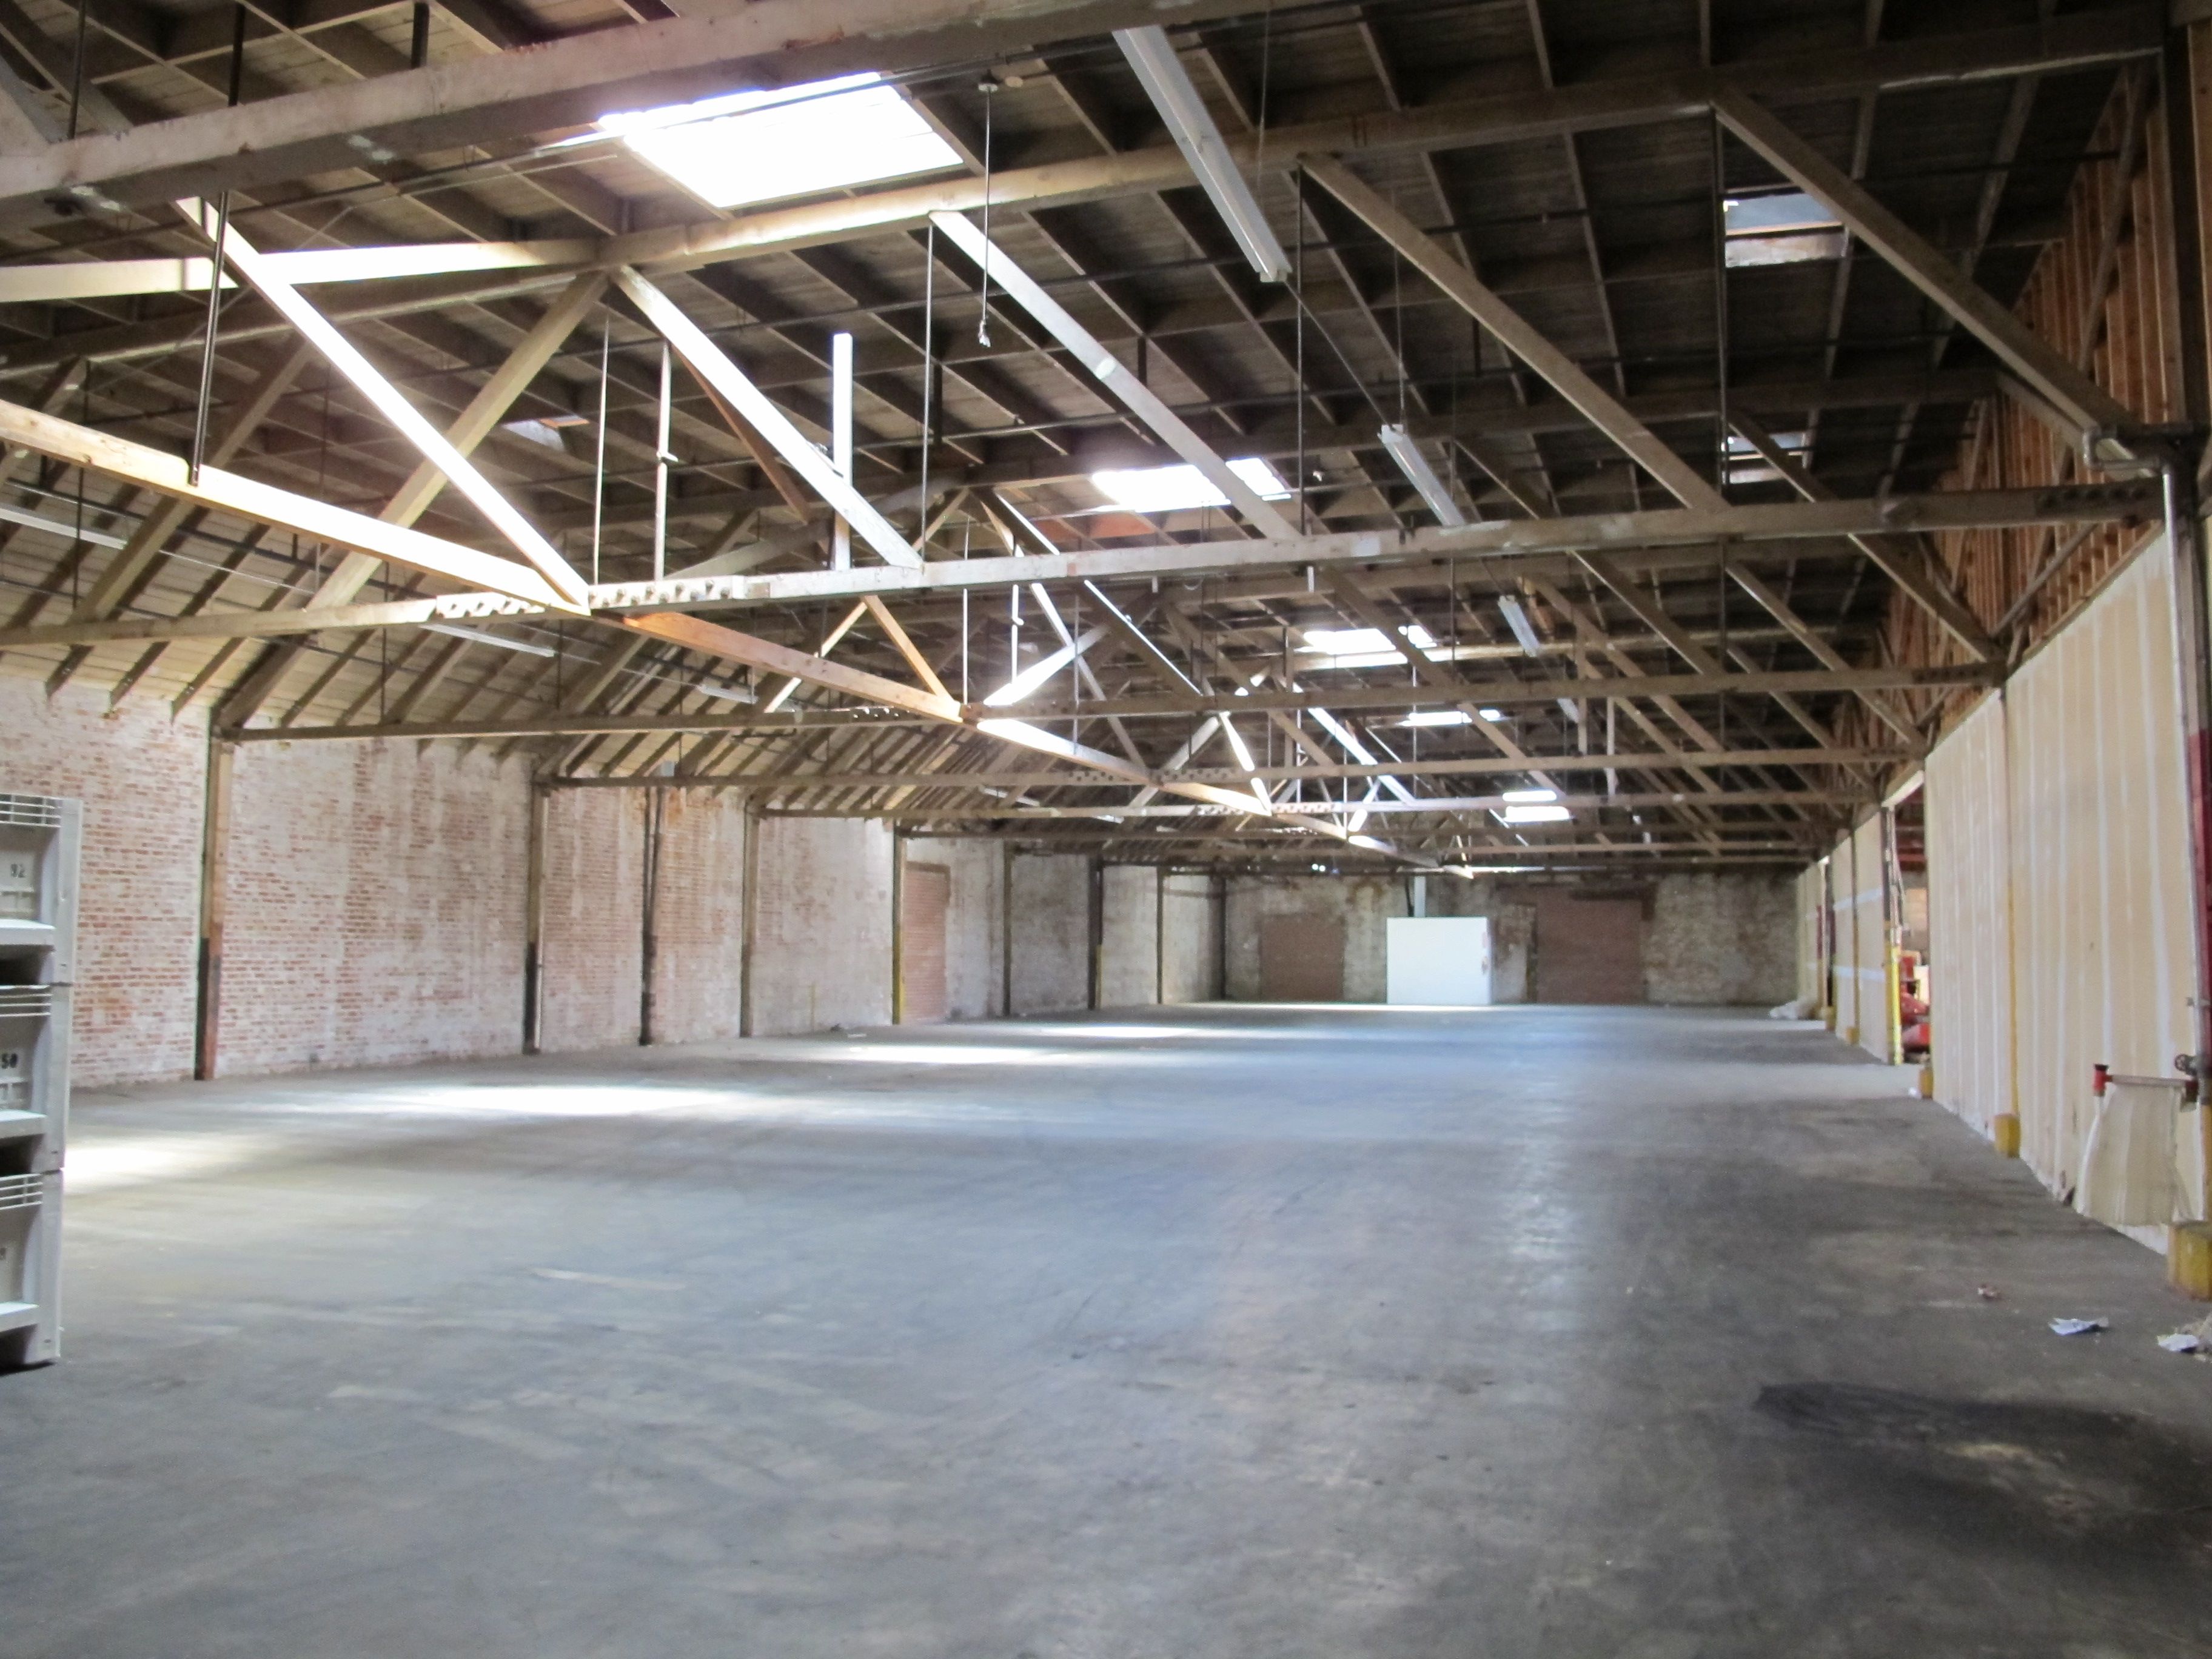 cannery Ware house interior.JPG